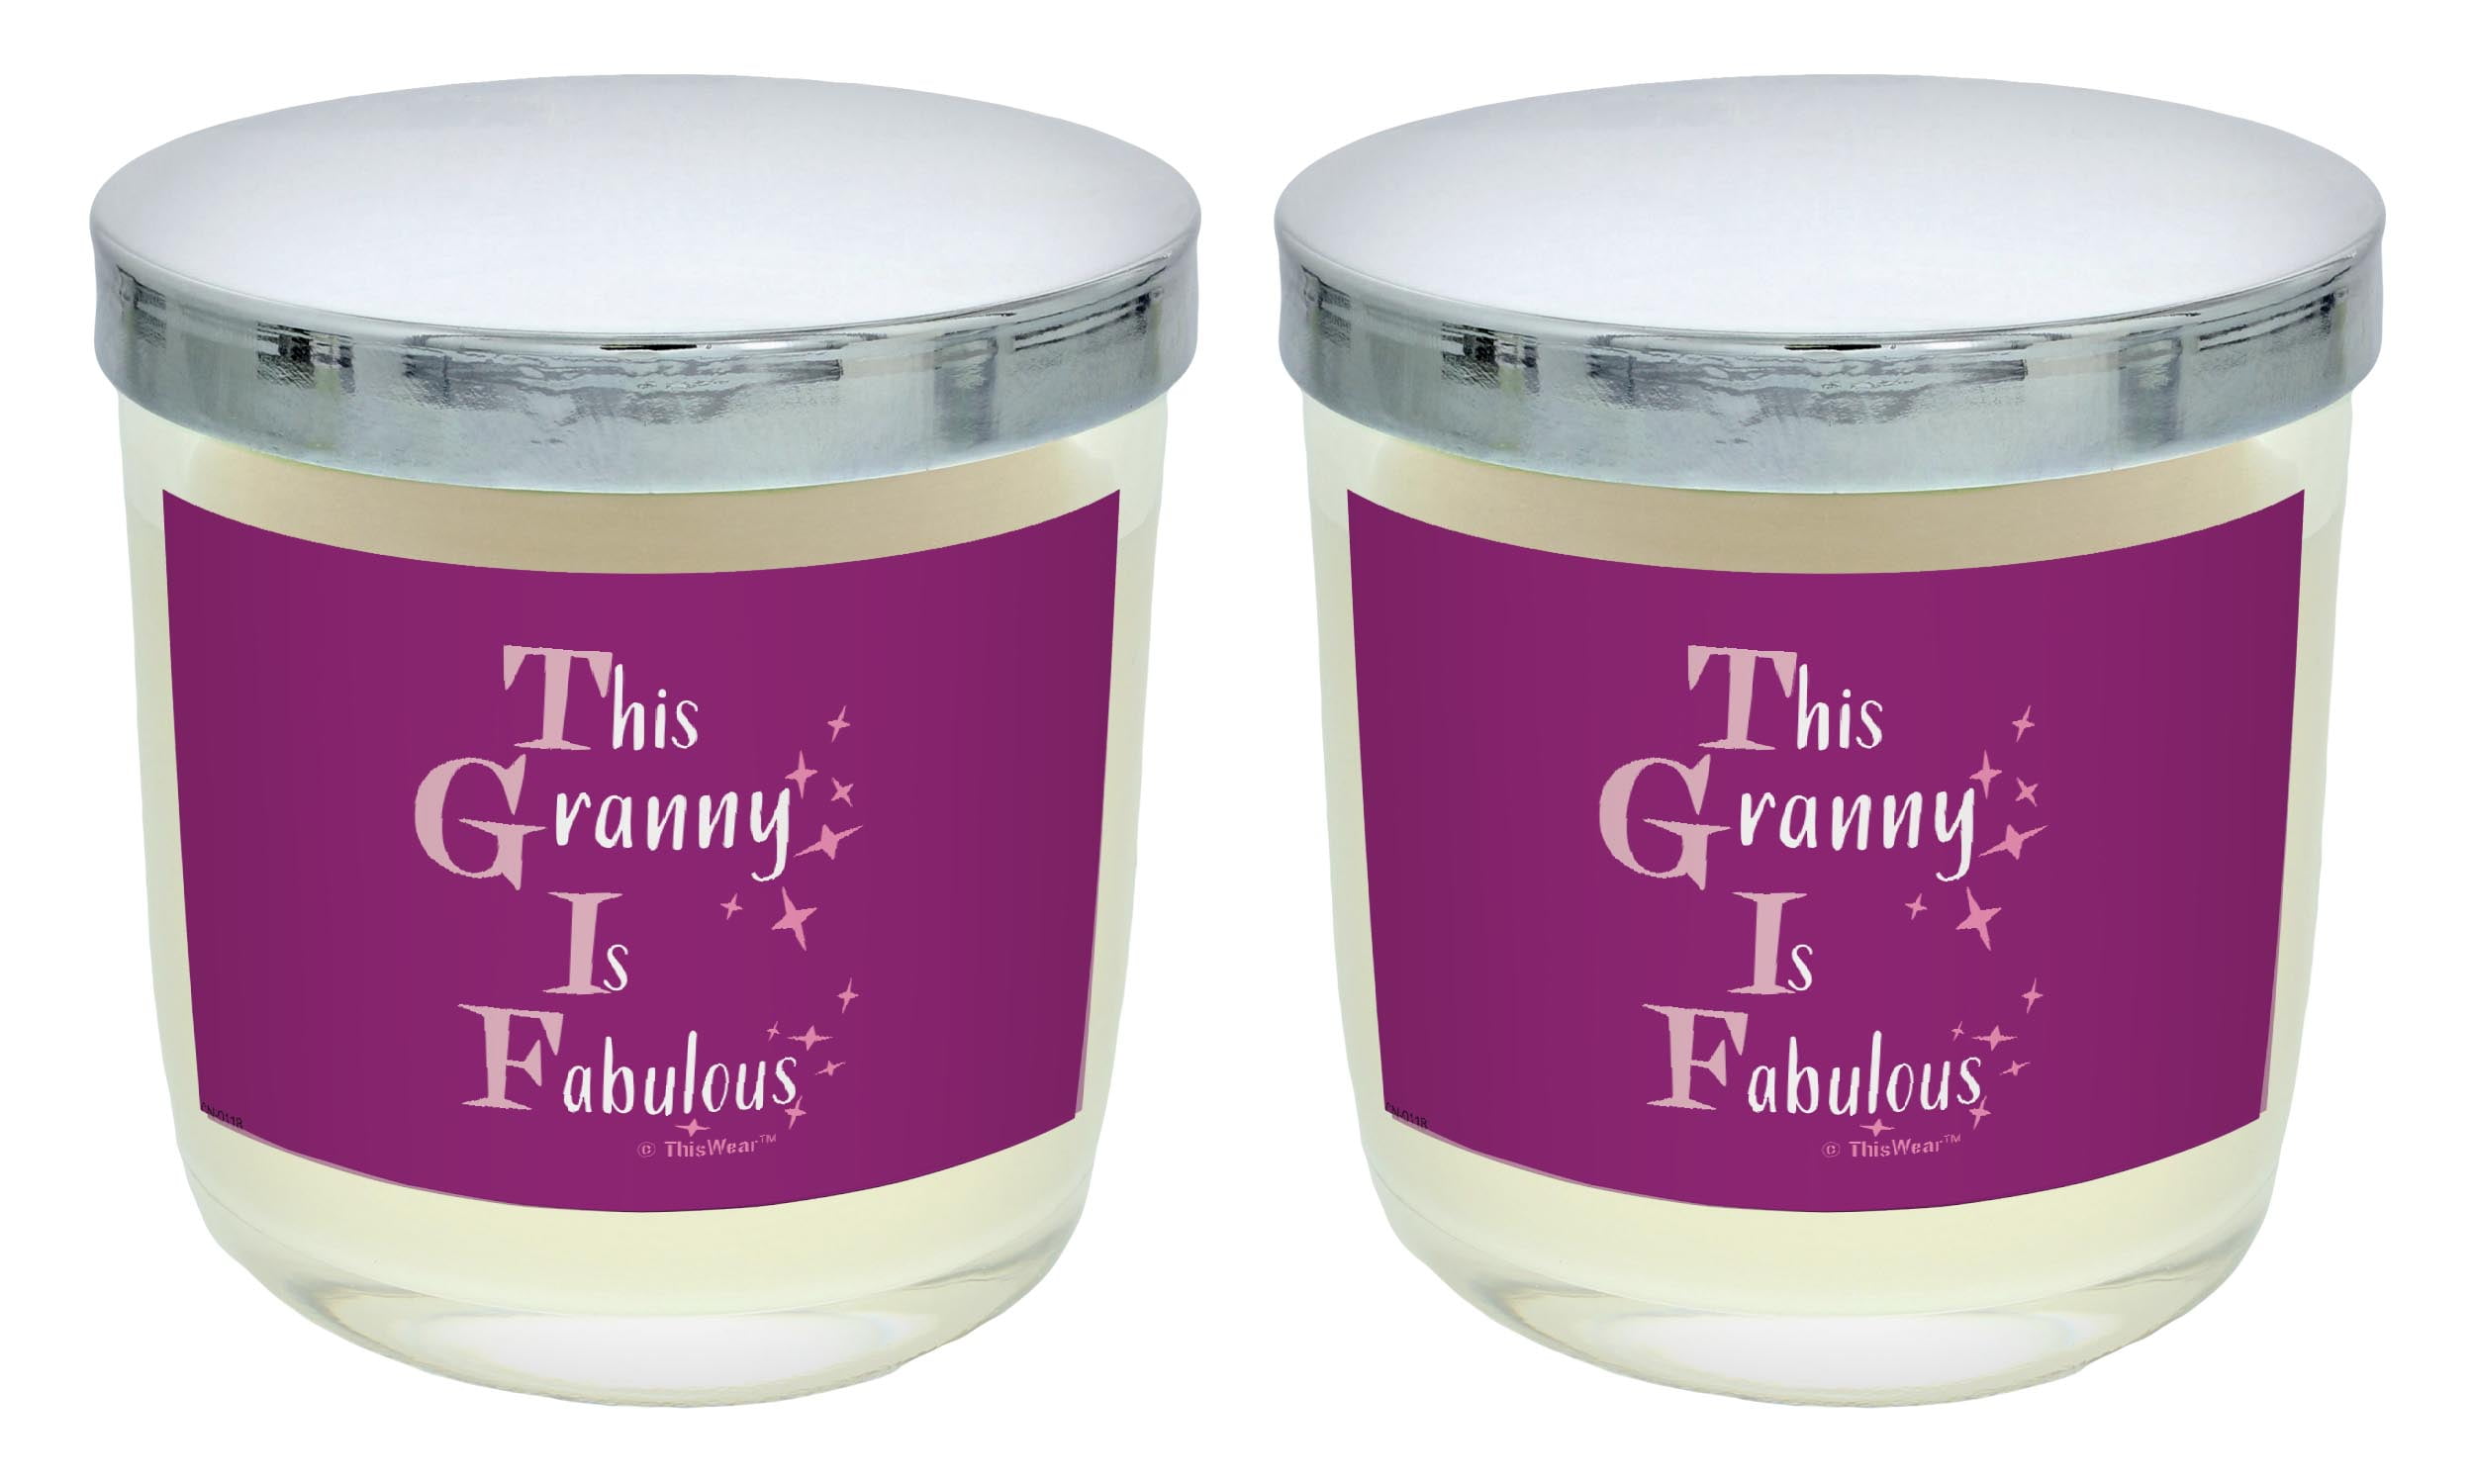 40hr GREEN GRANNY SMITH APPLES Triple Scented NATURAL Pillar Candle FRUITY GIFTS 